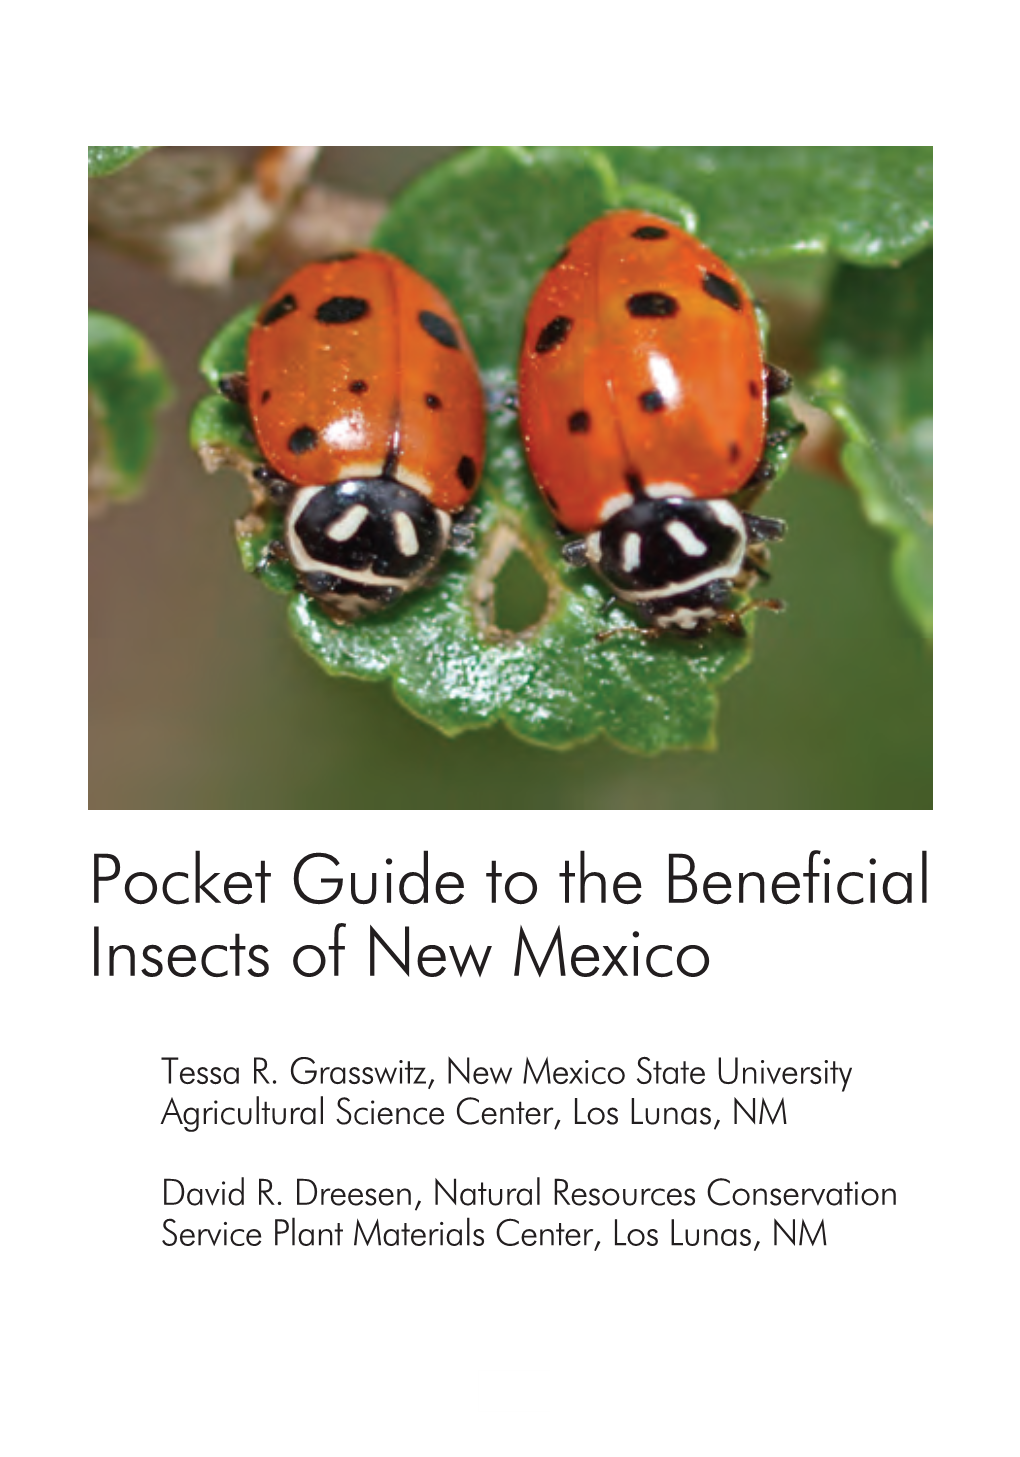 Pocket Guide to the Beneficial Insects of New Mexico